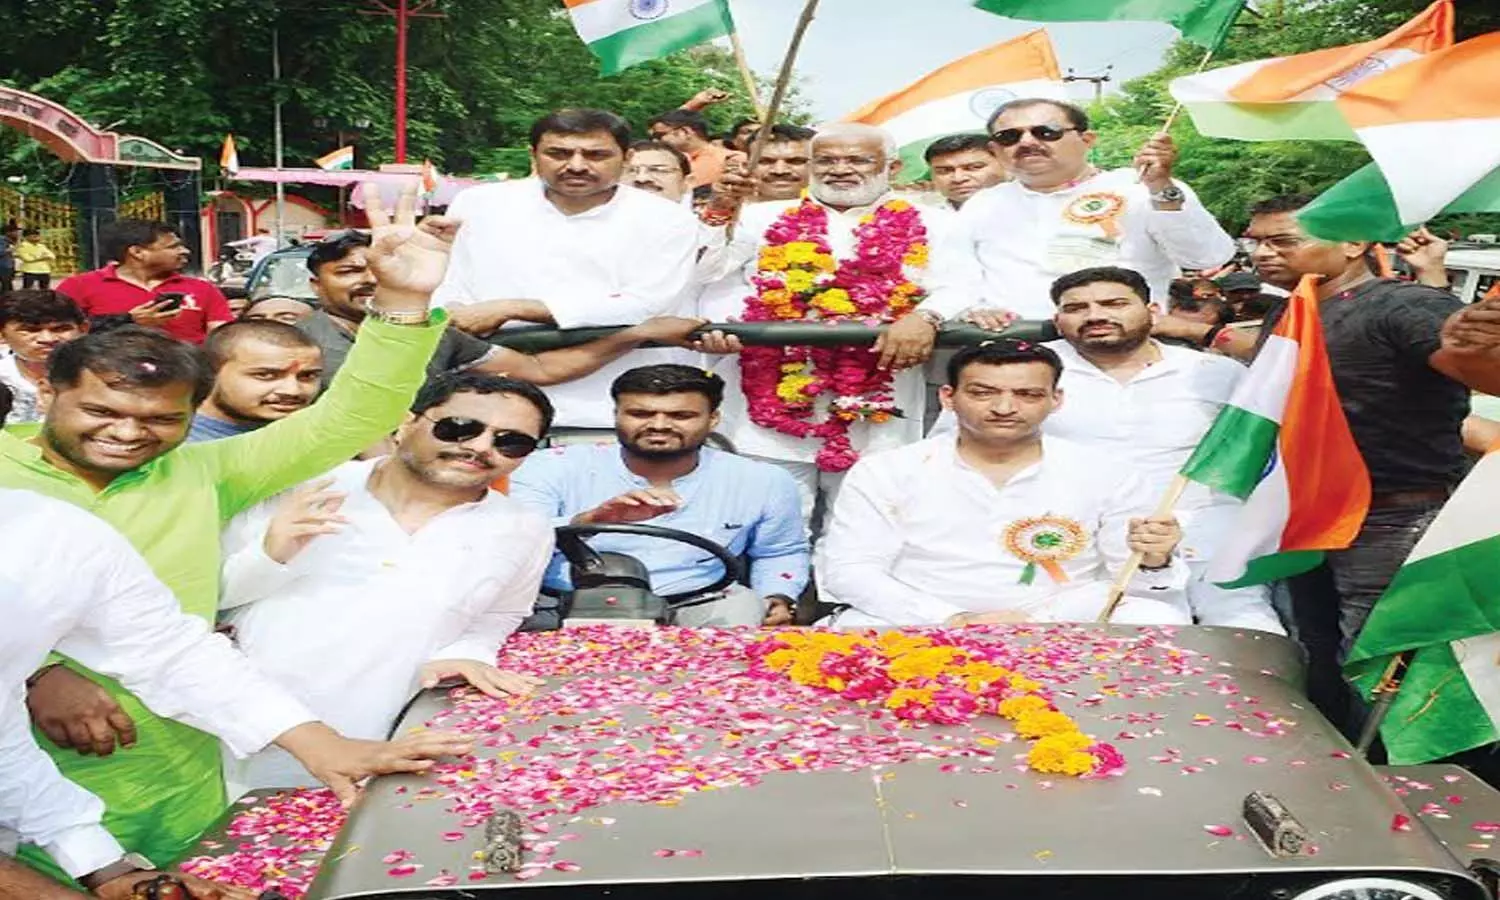 Tricolor yatra taken out in Jhansi, Swatantra Dev Singh said – there is love for the country in every particle of the soil